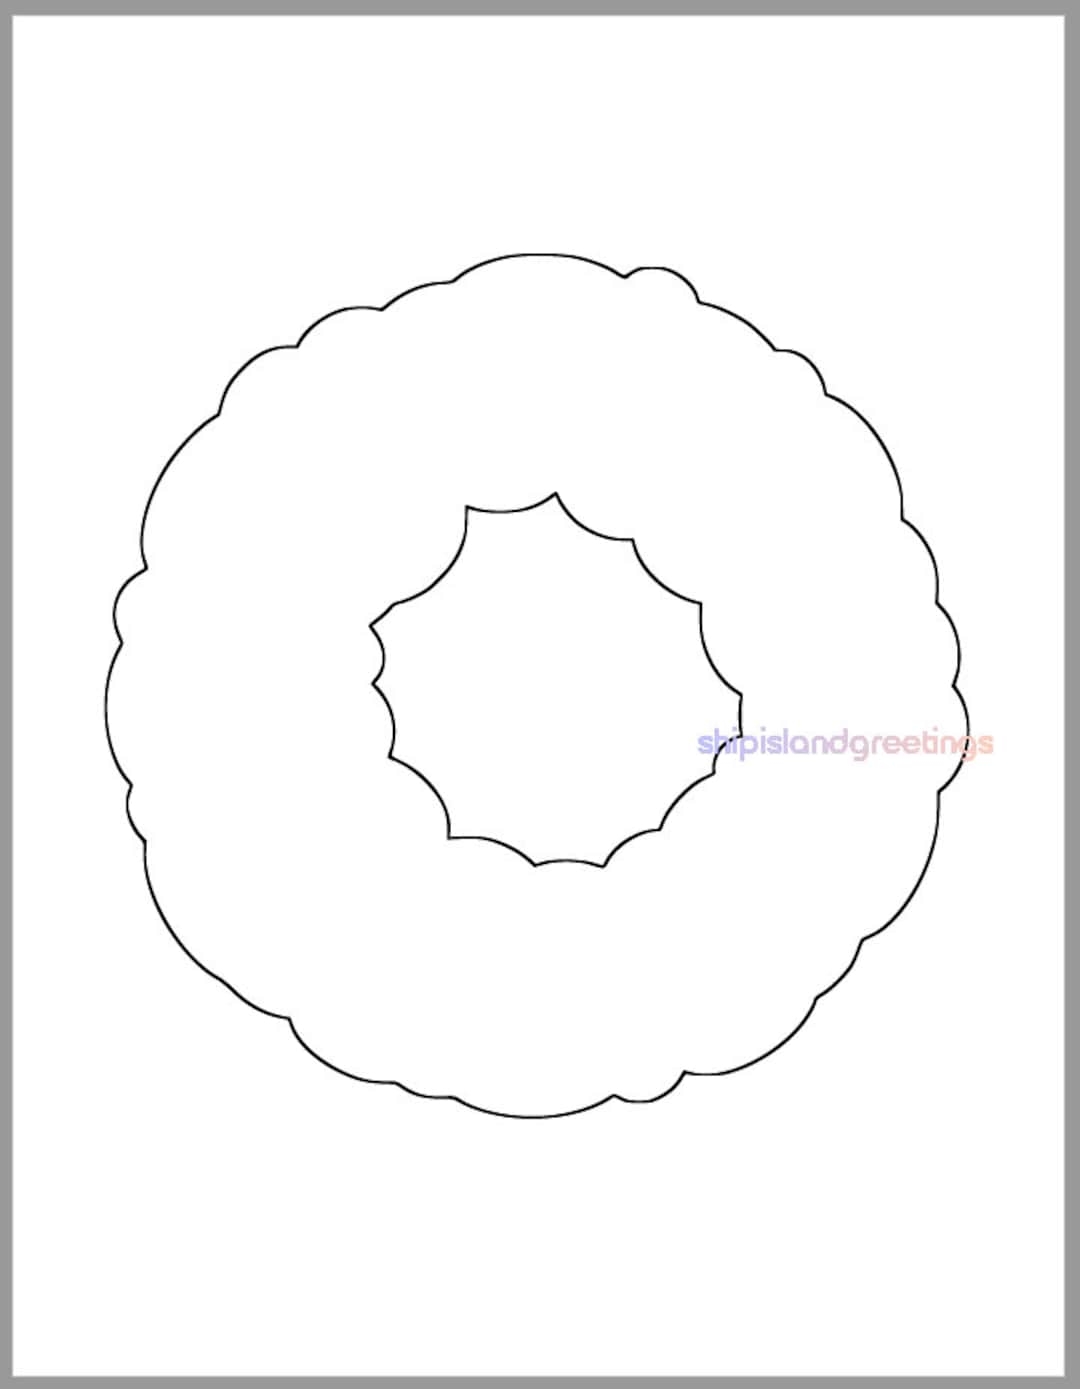 Printable Wreath Template pdf Download christmas Cutouts classroom Decor large Wreath Cutout holiday Craft Page kids Art preschool Crafts Etsy Norway